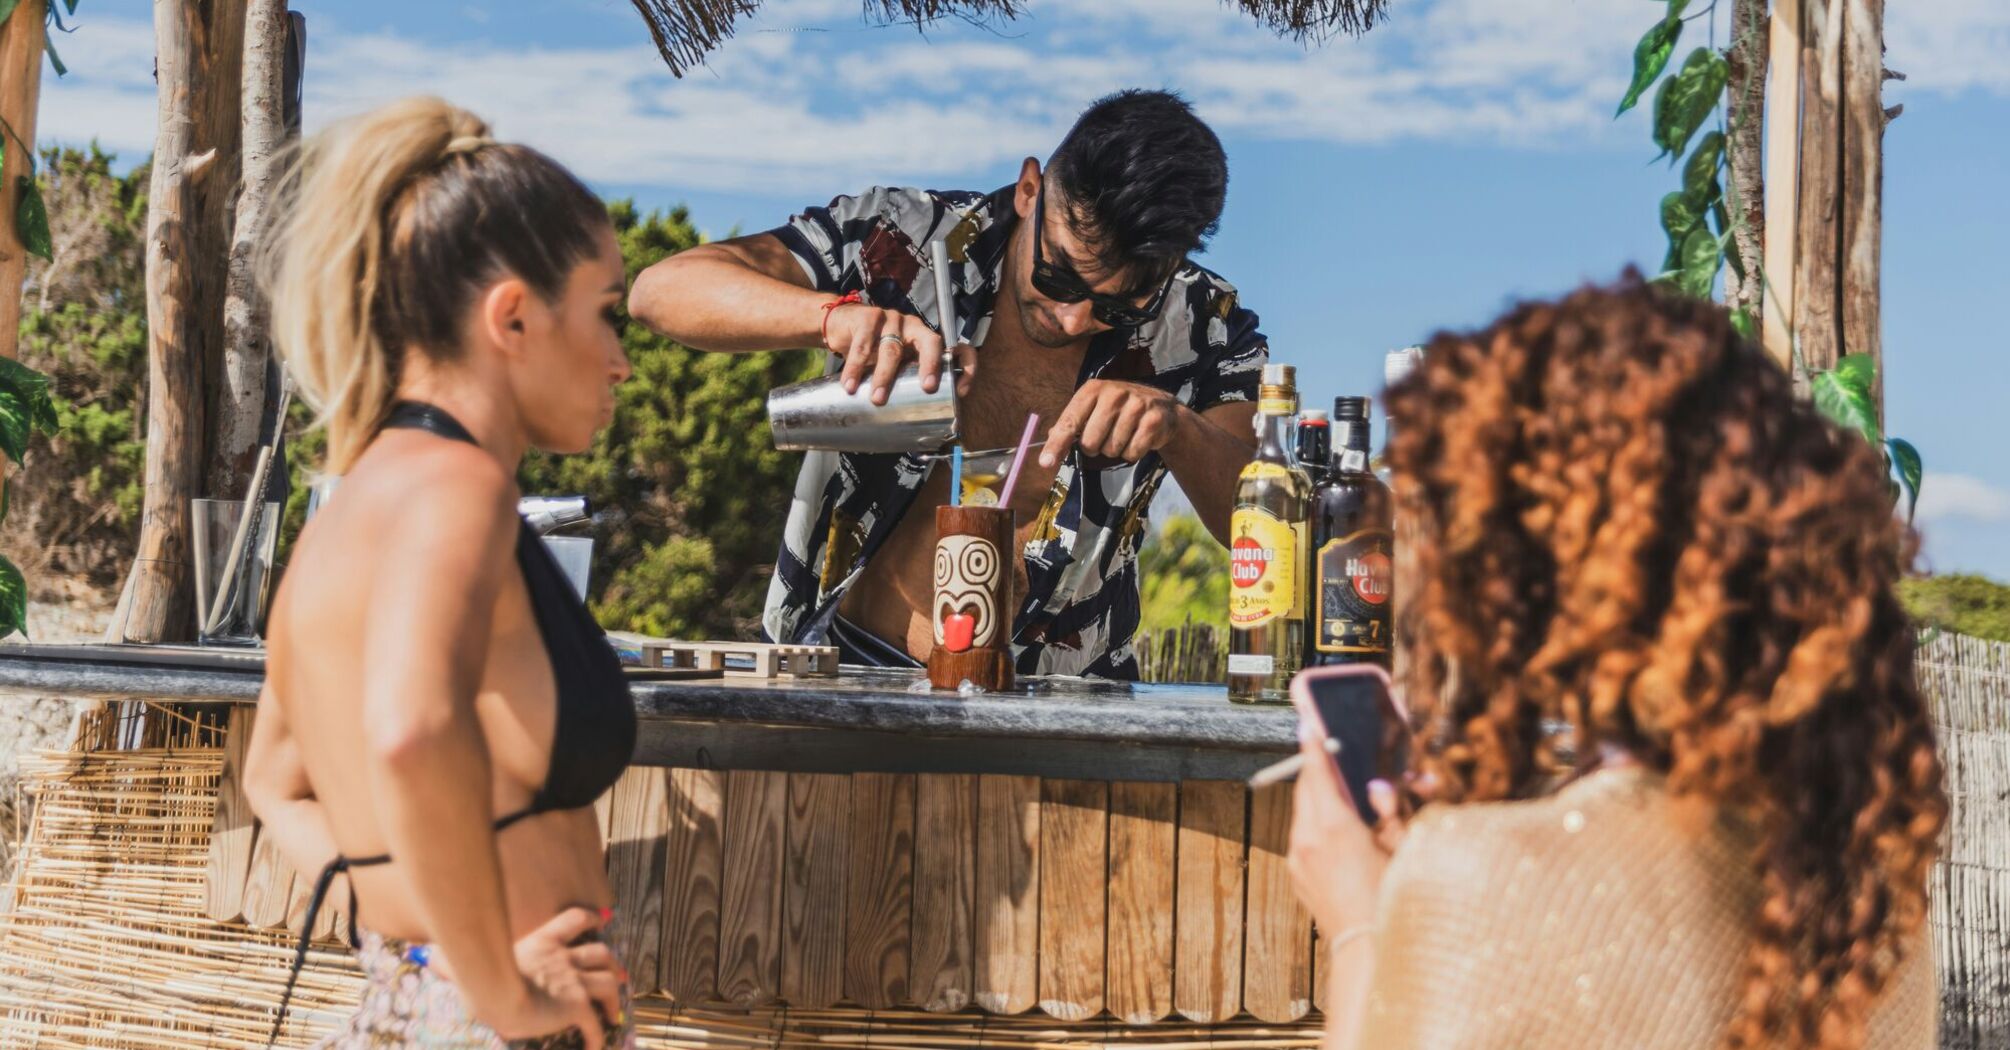 Bartender mixing a tropical cocktail at a beach club party